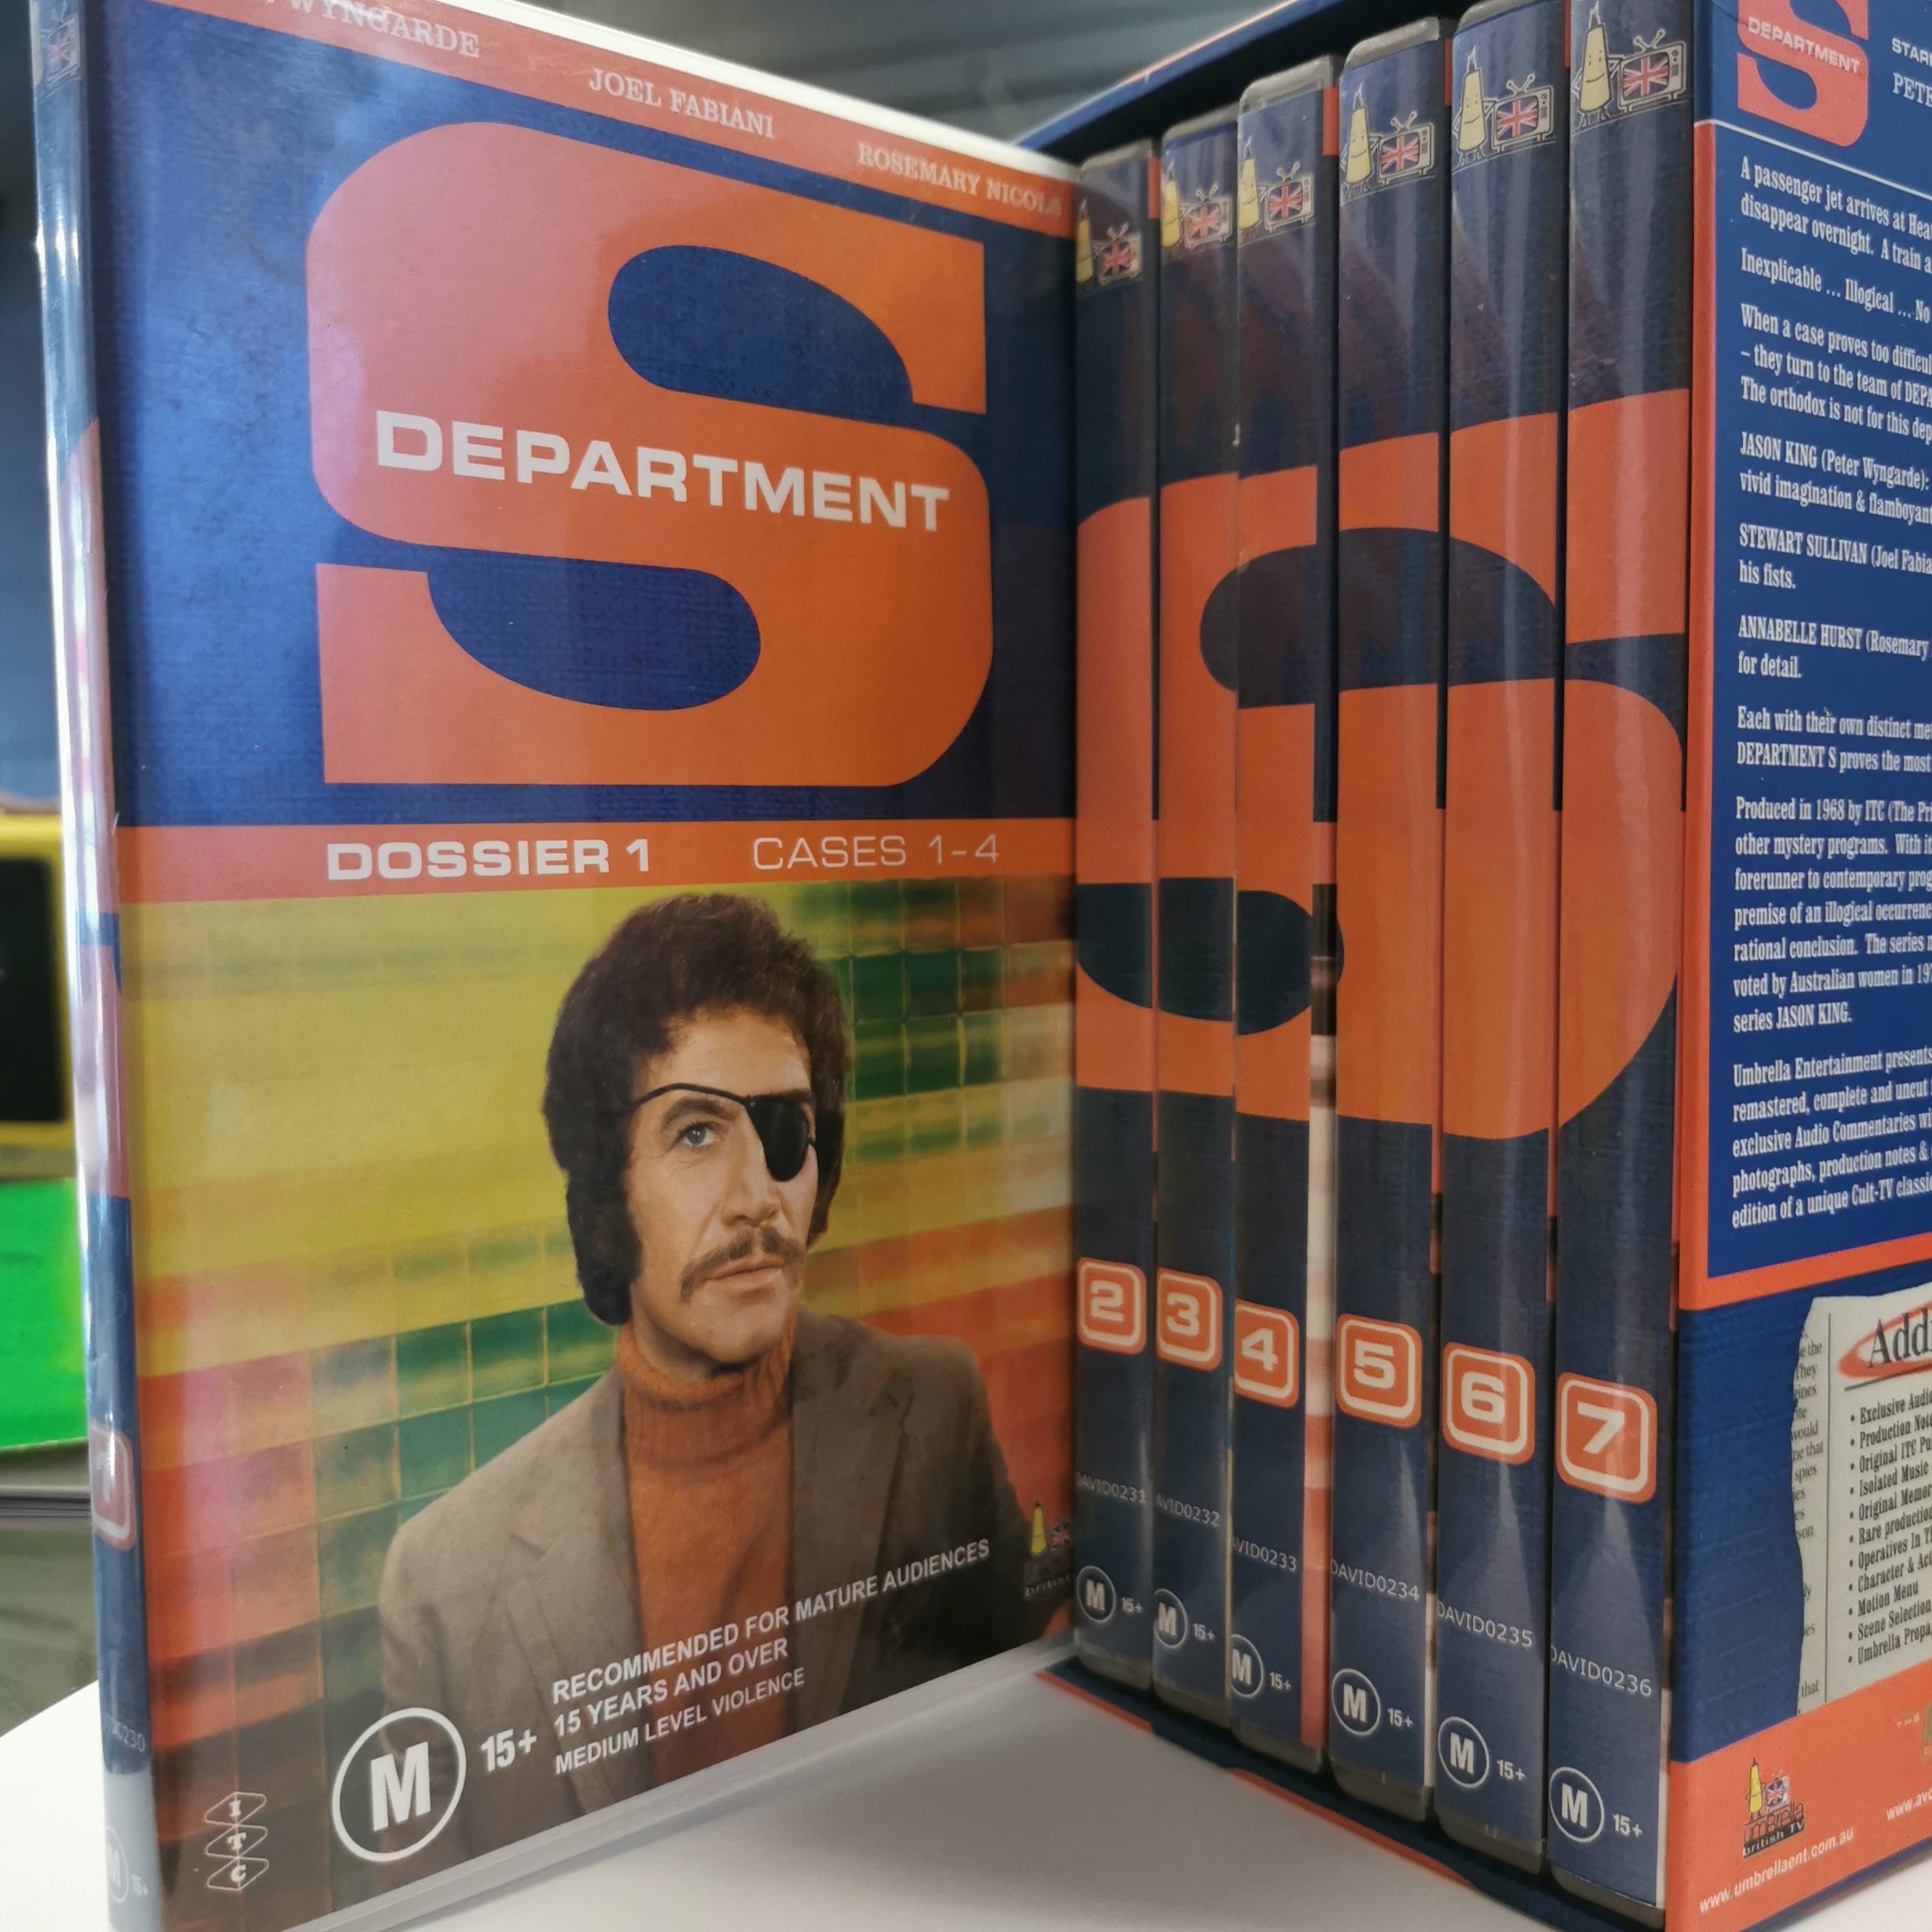 DEPARTMENT S- 35TH ANNIVERSARY SPECIAL EDITION 7DVD'S VG